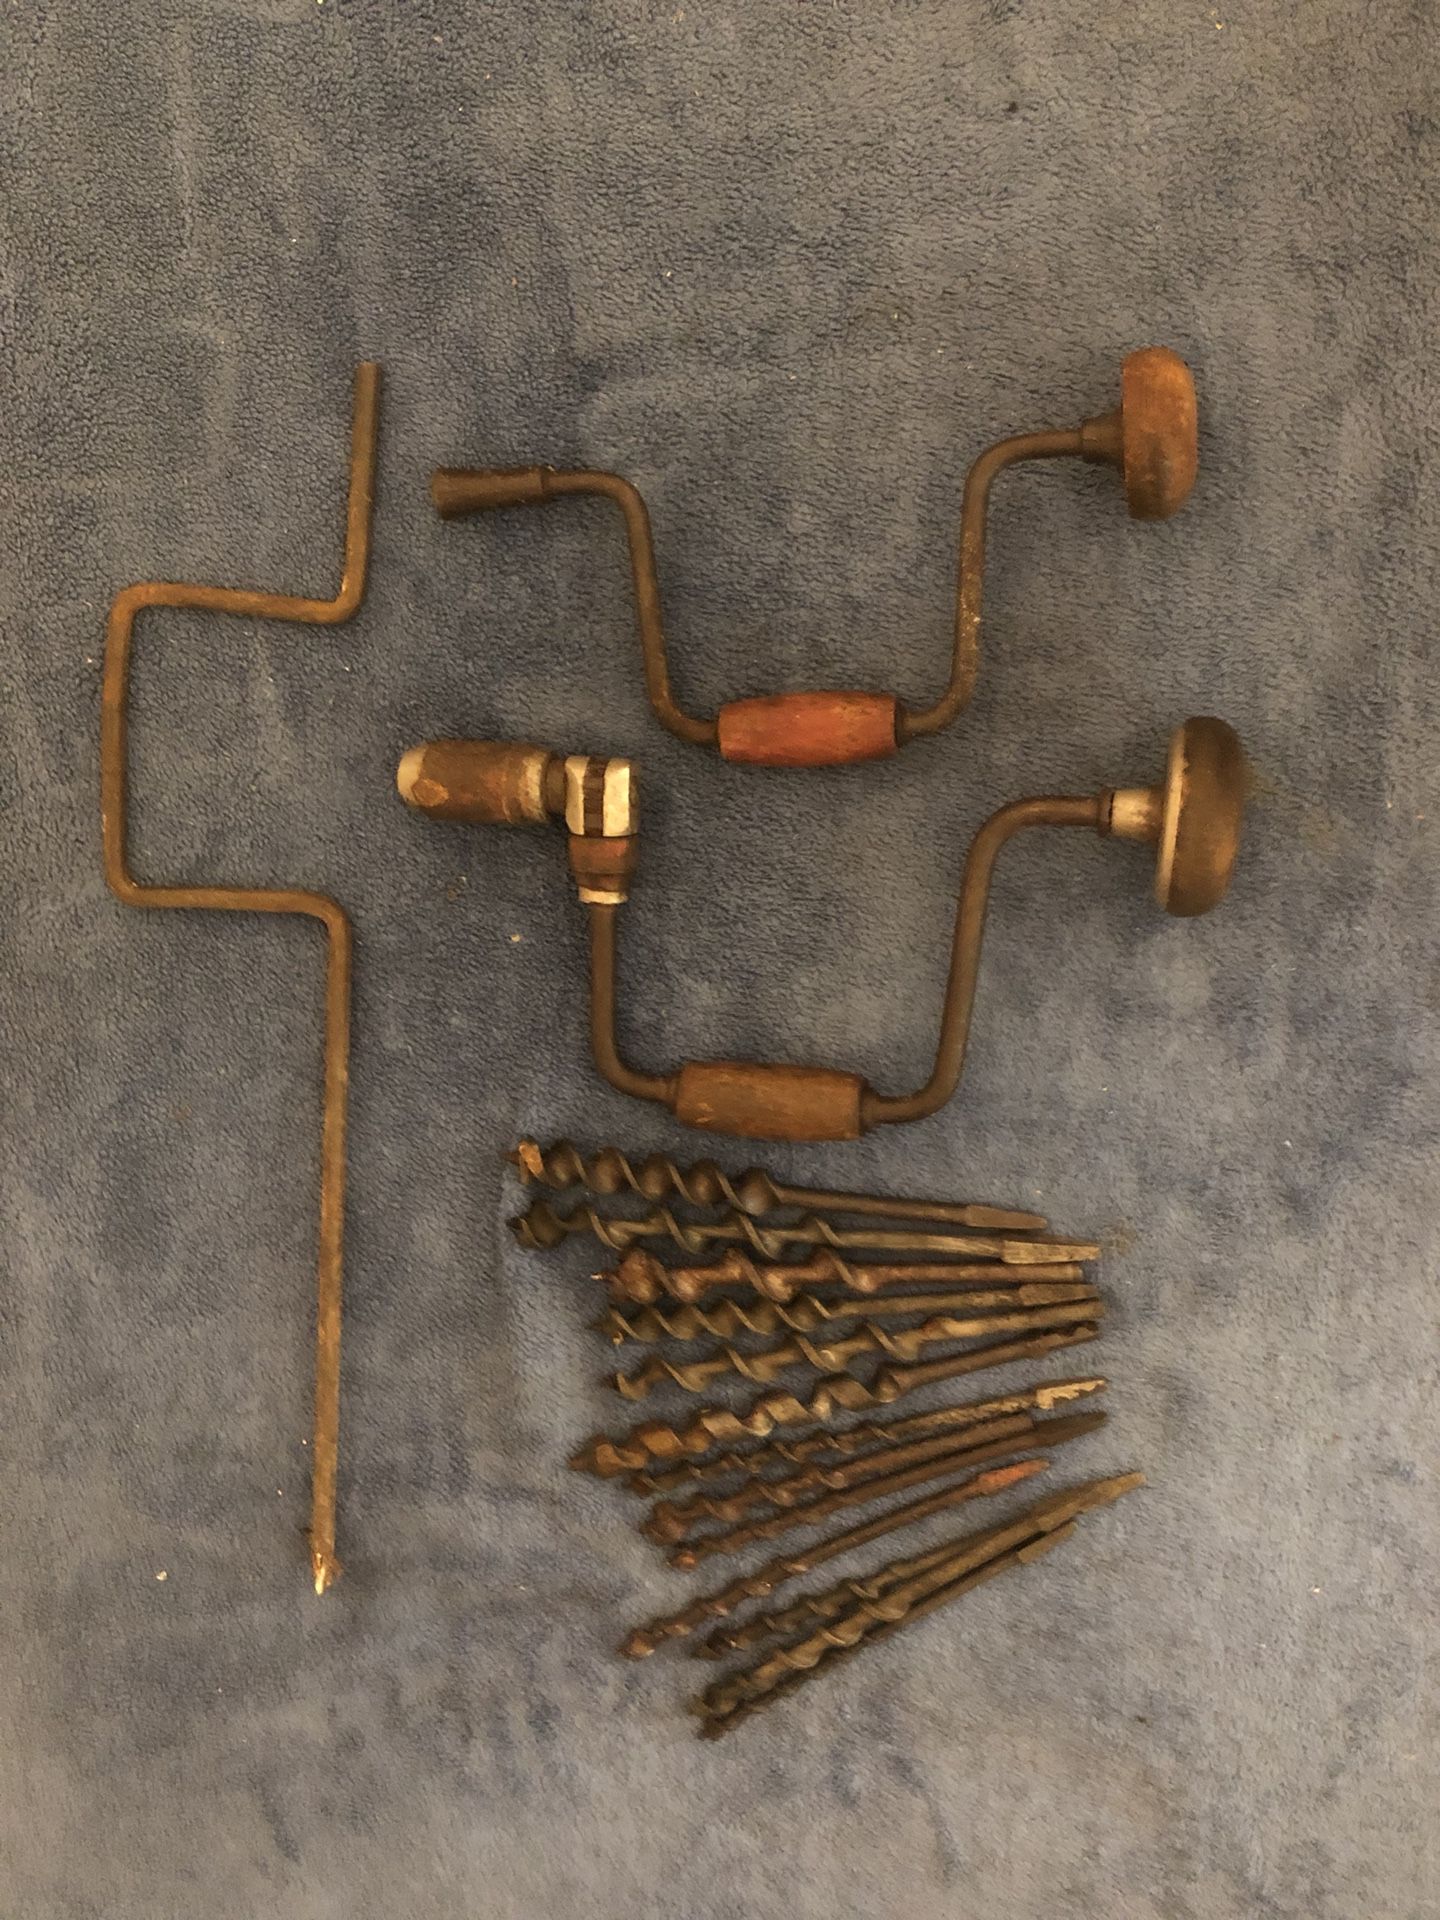 Stanley and German antique hand drill and bits